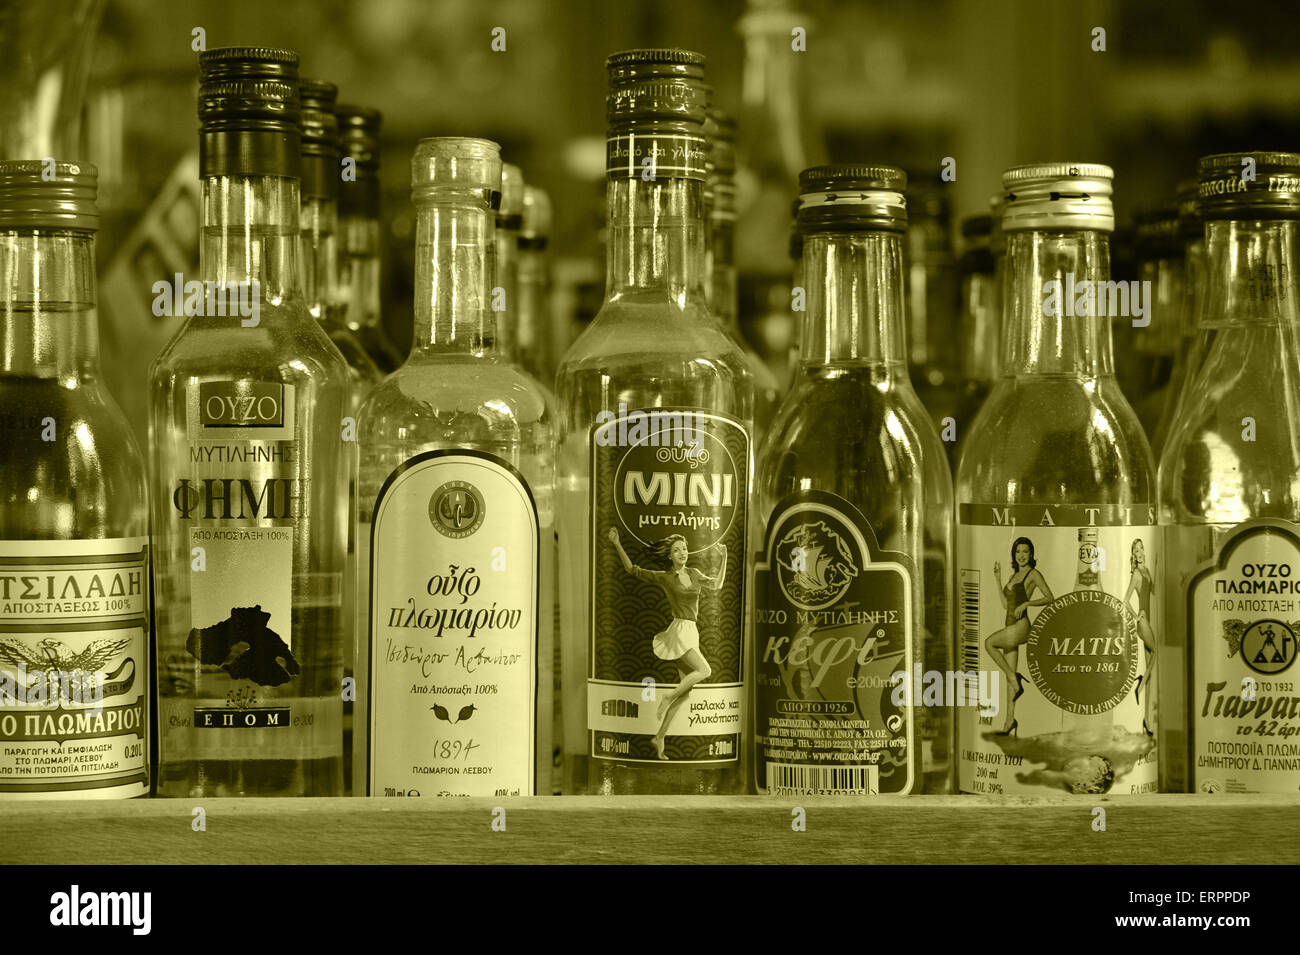 Ouzo is the typical drink of Greece. Stock Photo